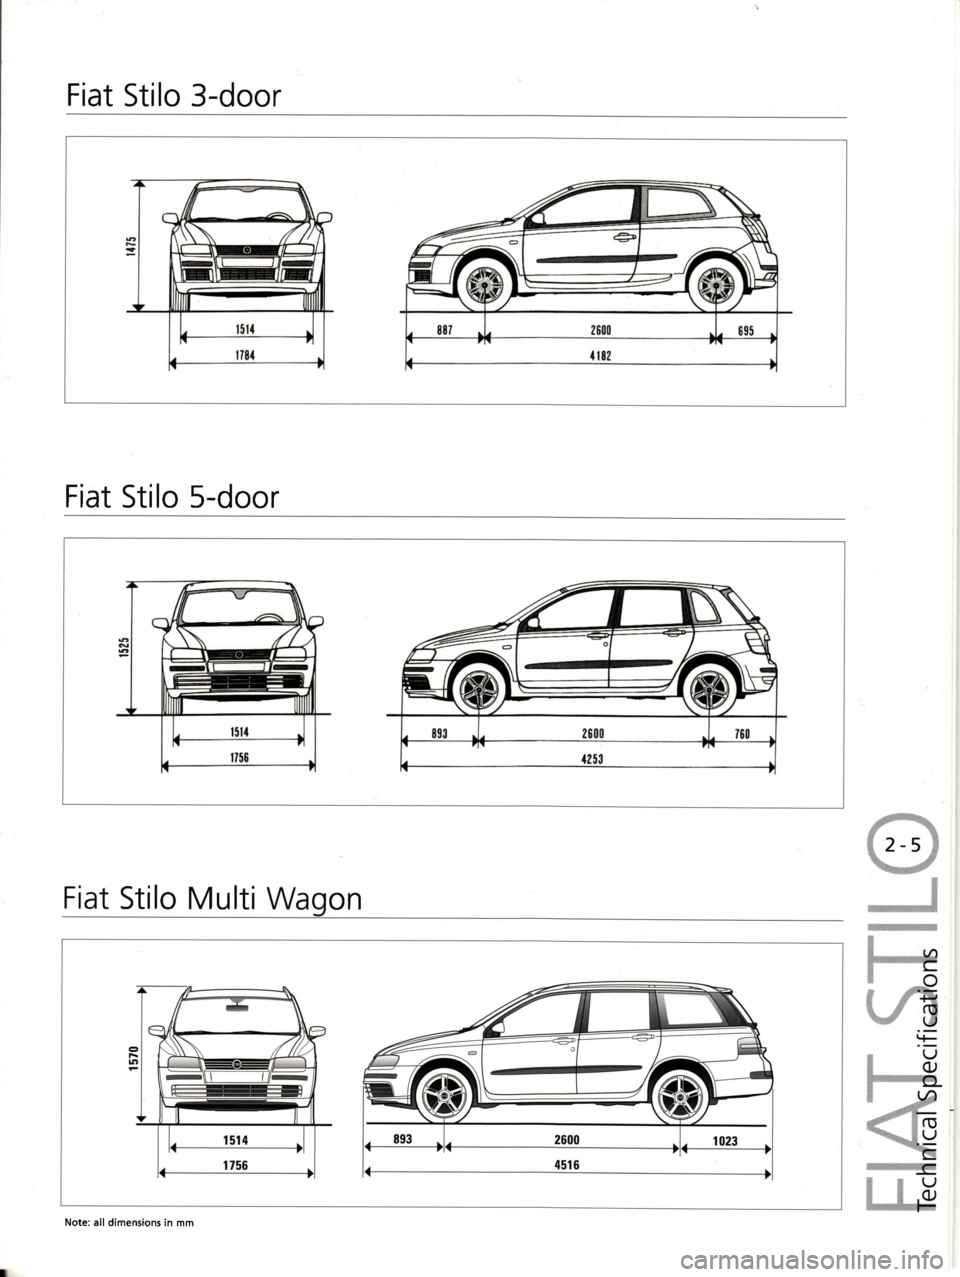 FIAT STILO 2004 1.G Technical Specifications Manual Fiat Stilo 3-door
Fiat Stilo s-door
onStiloMulti
Note: all dimensions in mm 